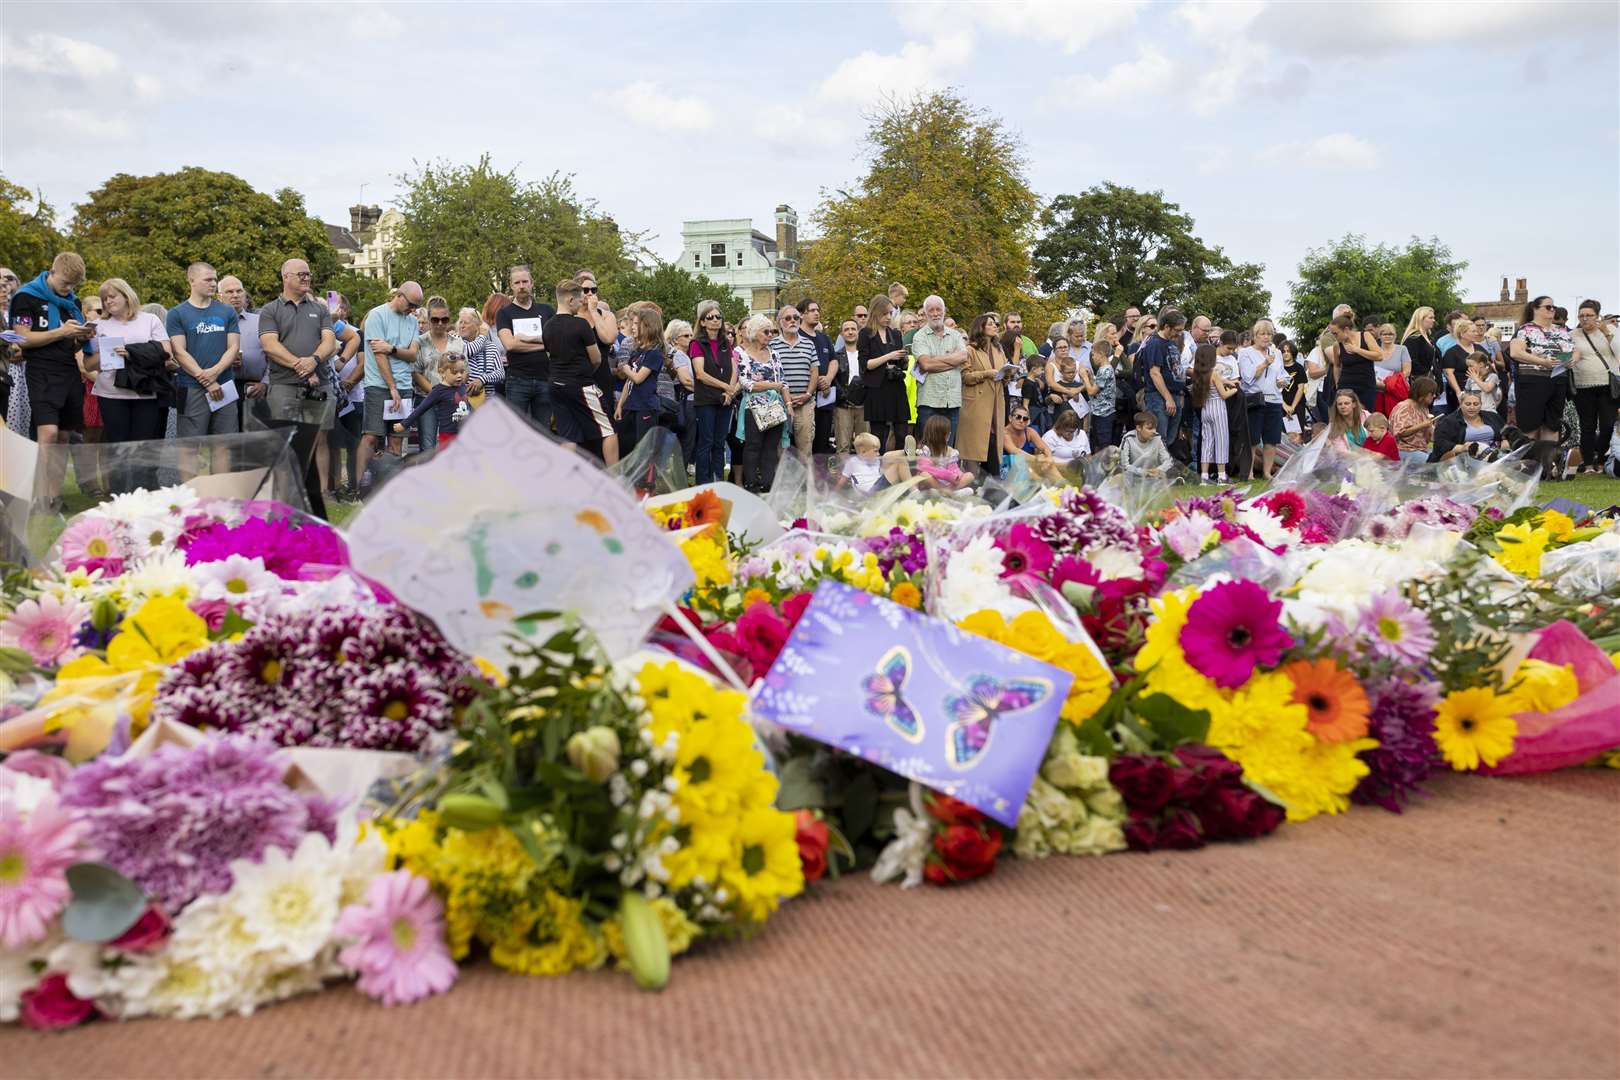 Floral tributes at Rochester Castle Gardens have led to the food festival being postponed. Picture: Countrywide Photographic / Martin Apps